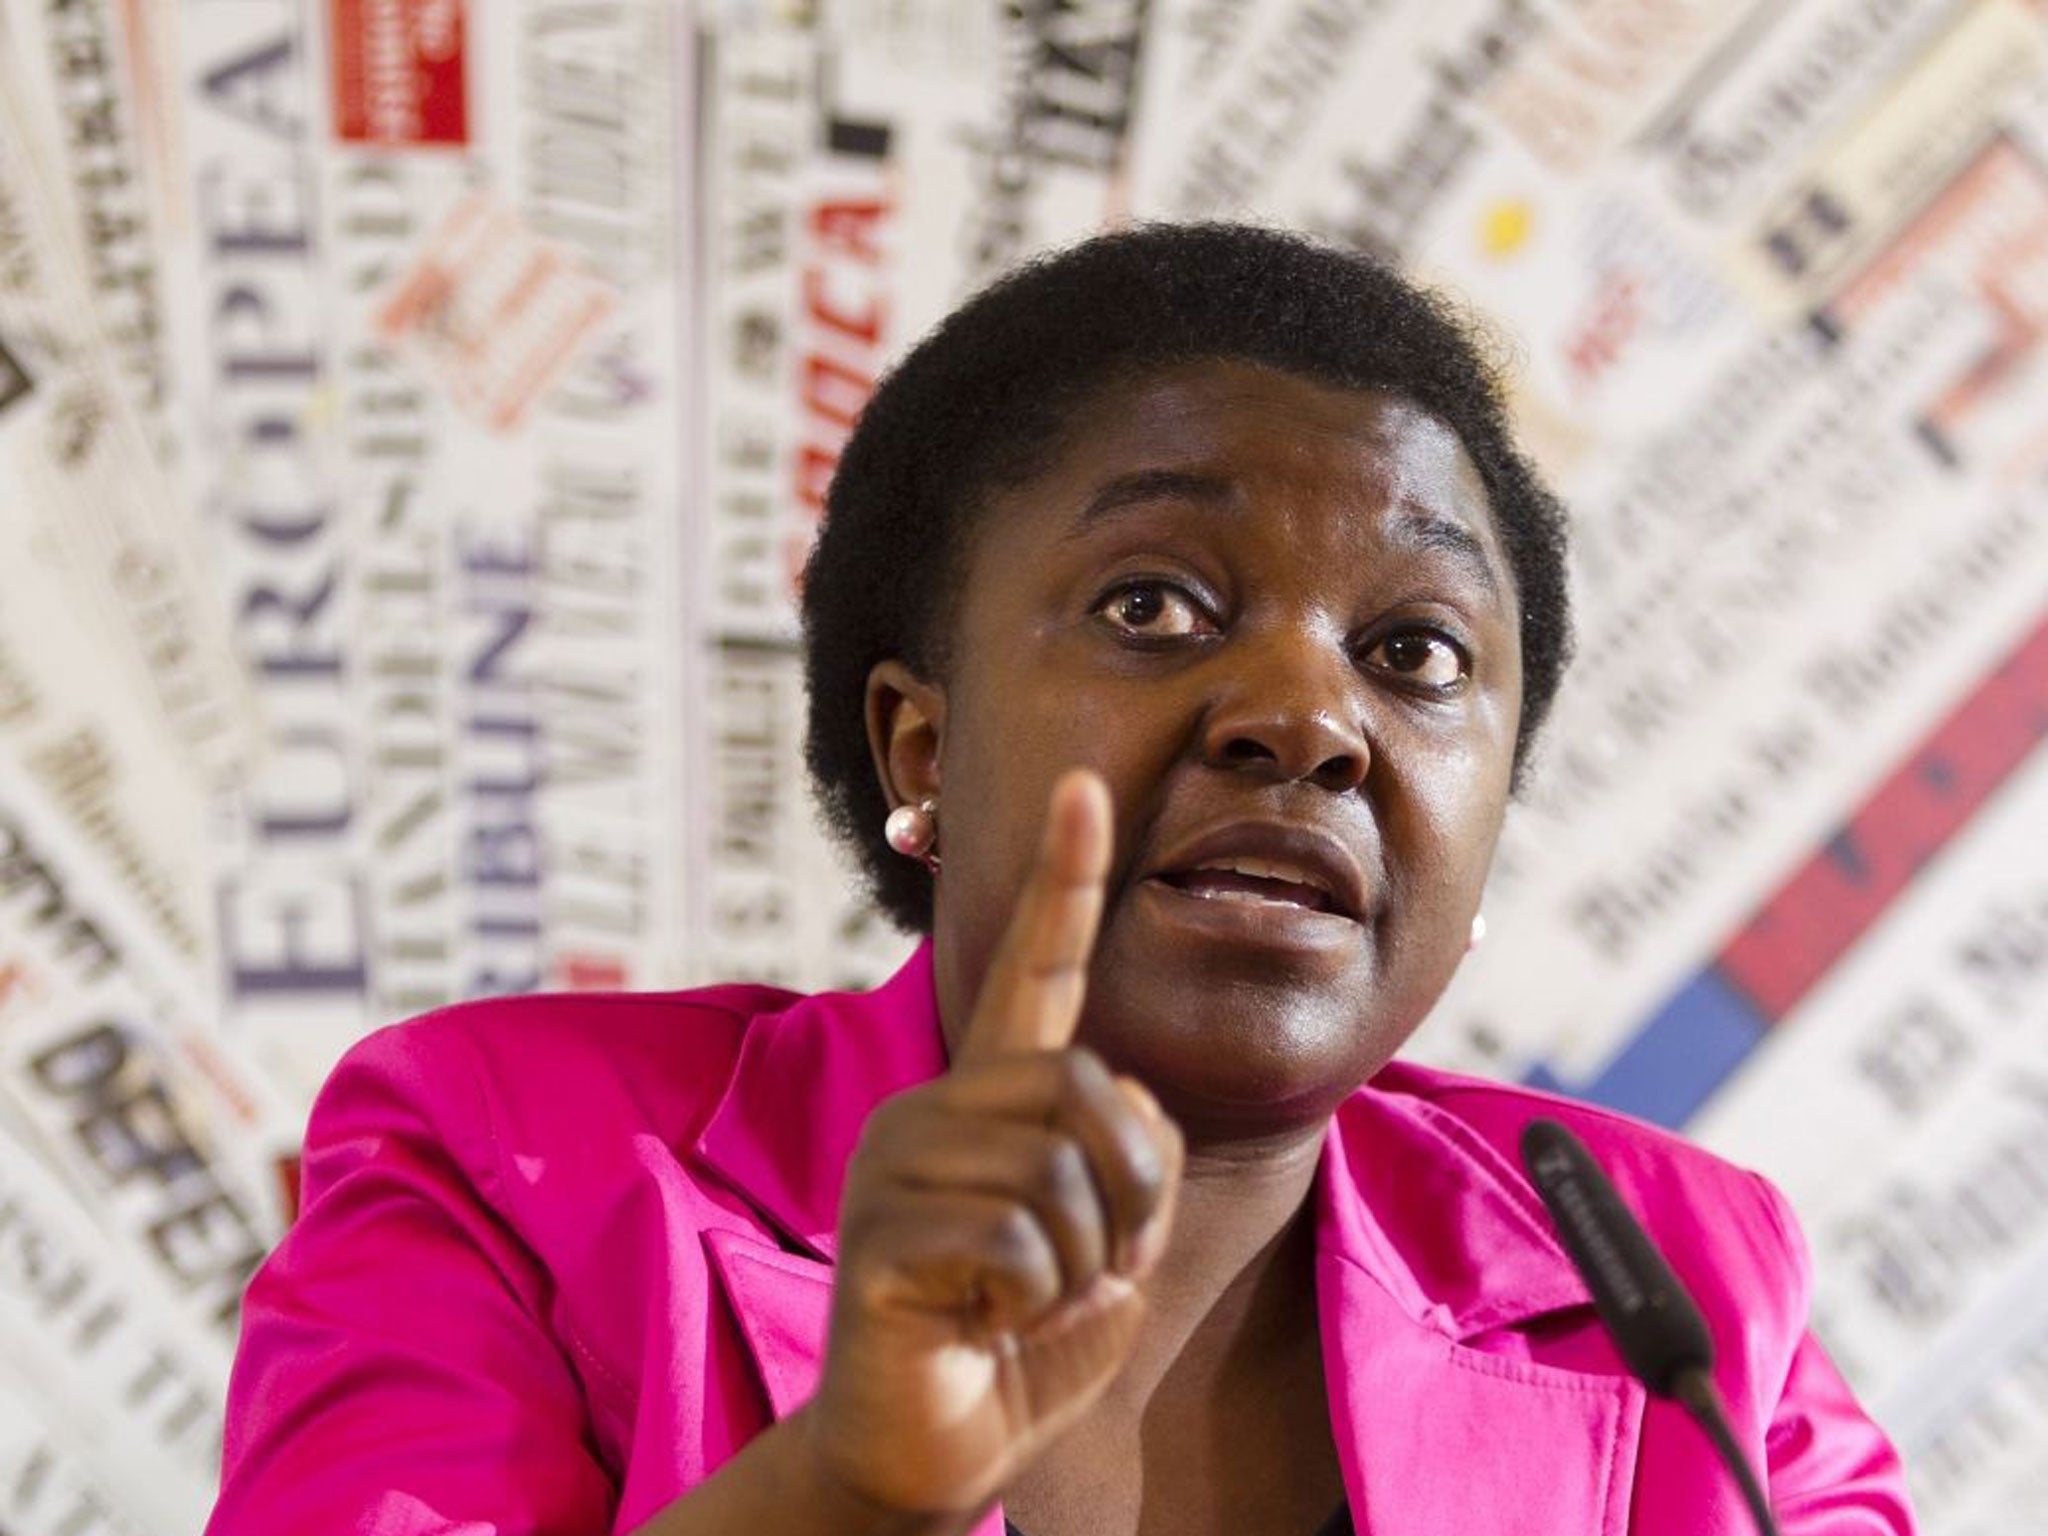 Kyenge, who is the minister for Integration, and is originally from the Democratic Republic of Congo, was speaking at a political rally Cervia in central Italy on Friday, when someone in the audience threw bananas towards the stage, narrowly missing it.